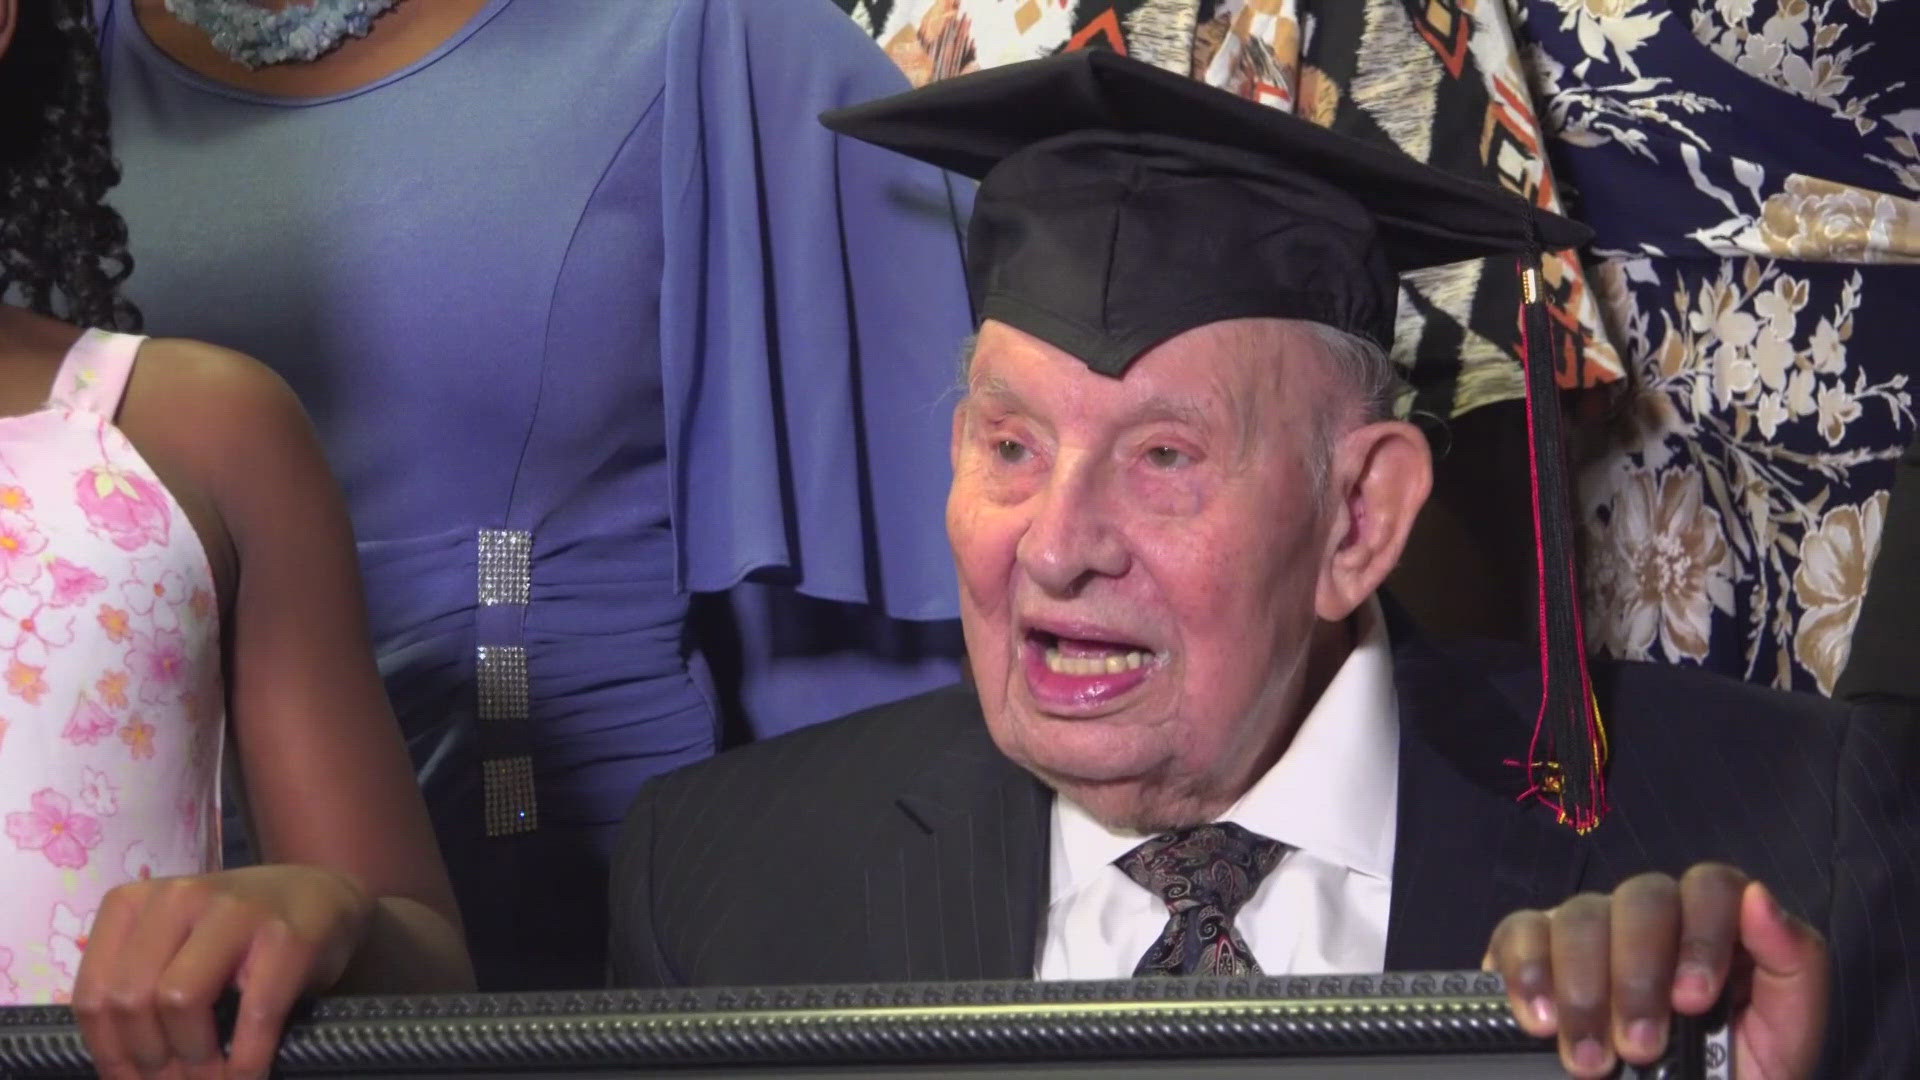 John Jack Milton started working on a college degree back in the 1940s.
Then life got in the way.